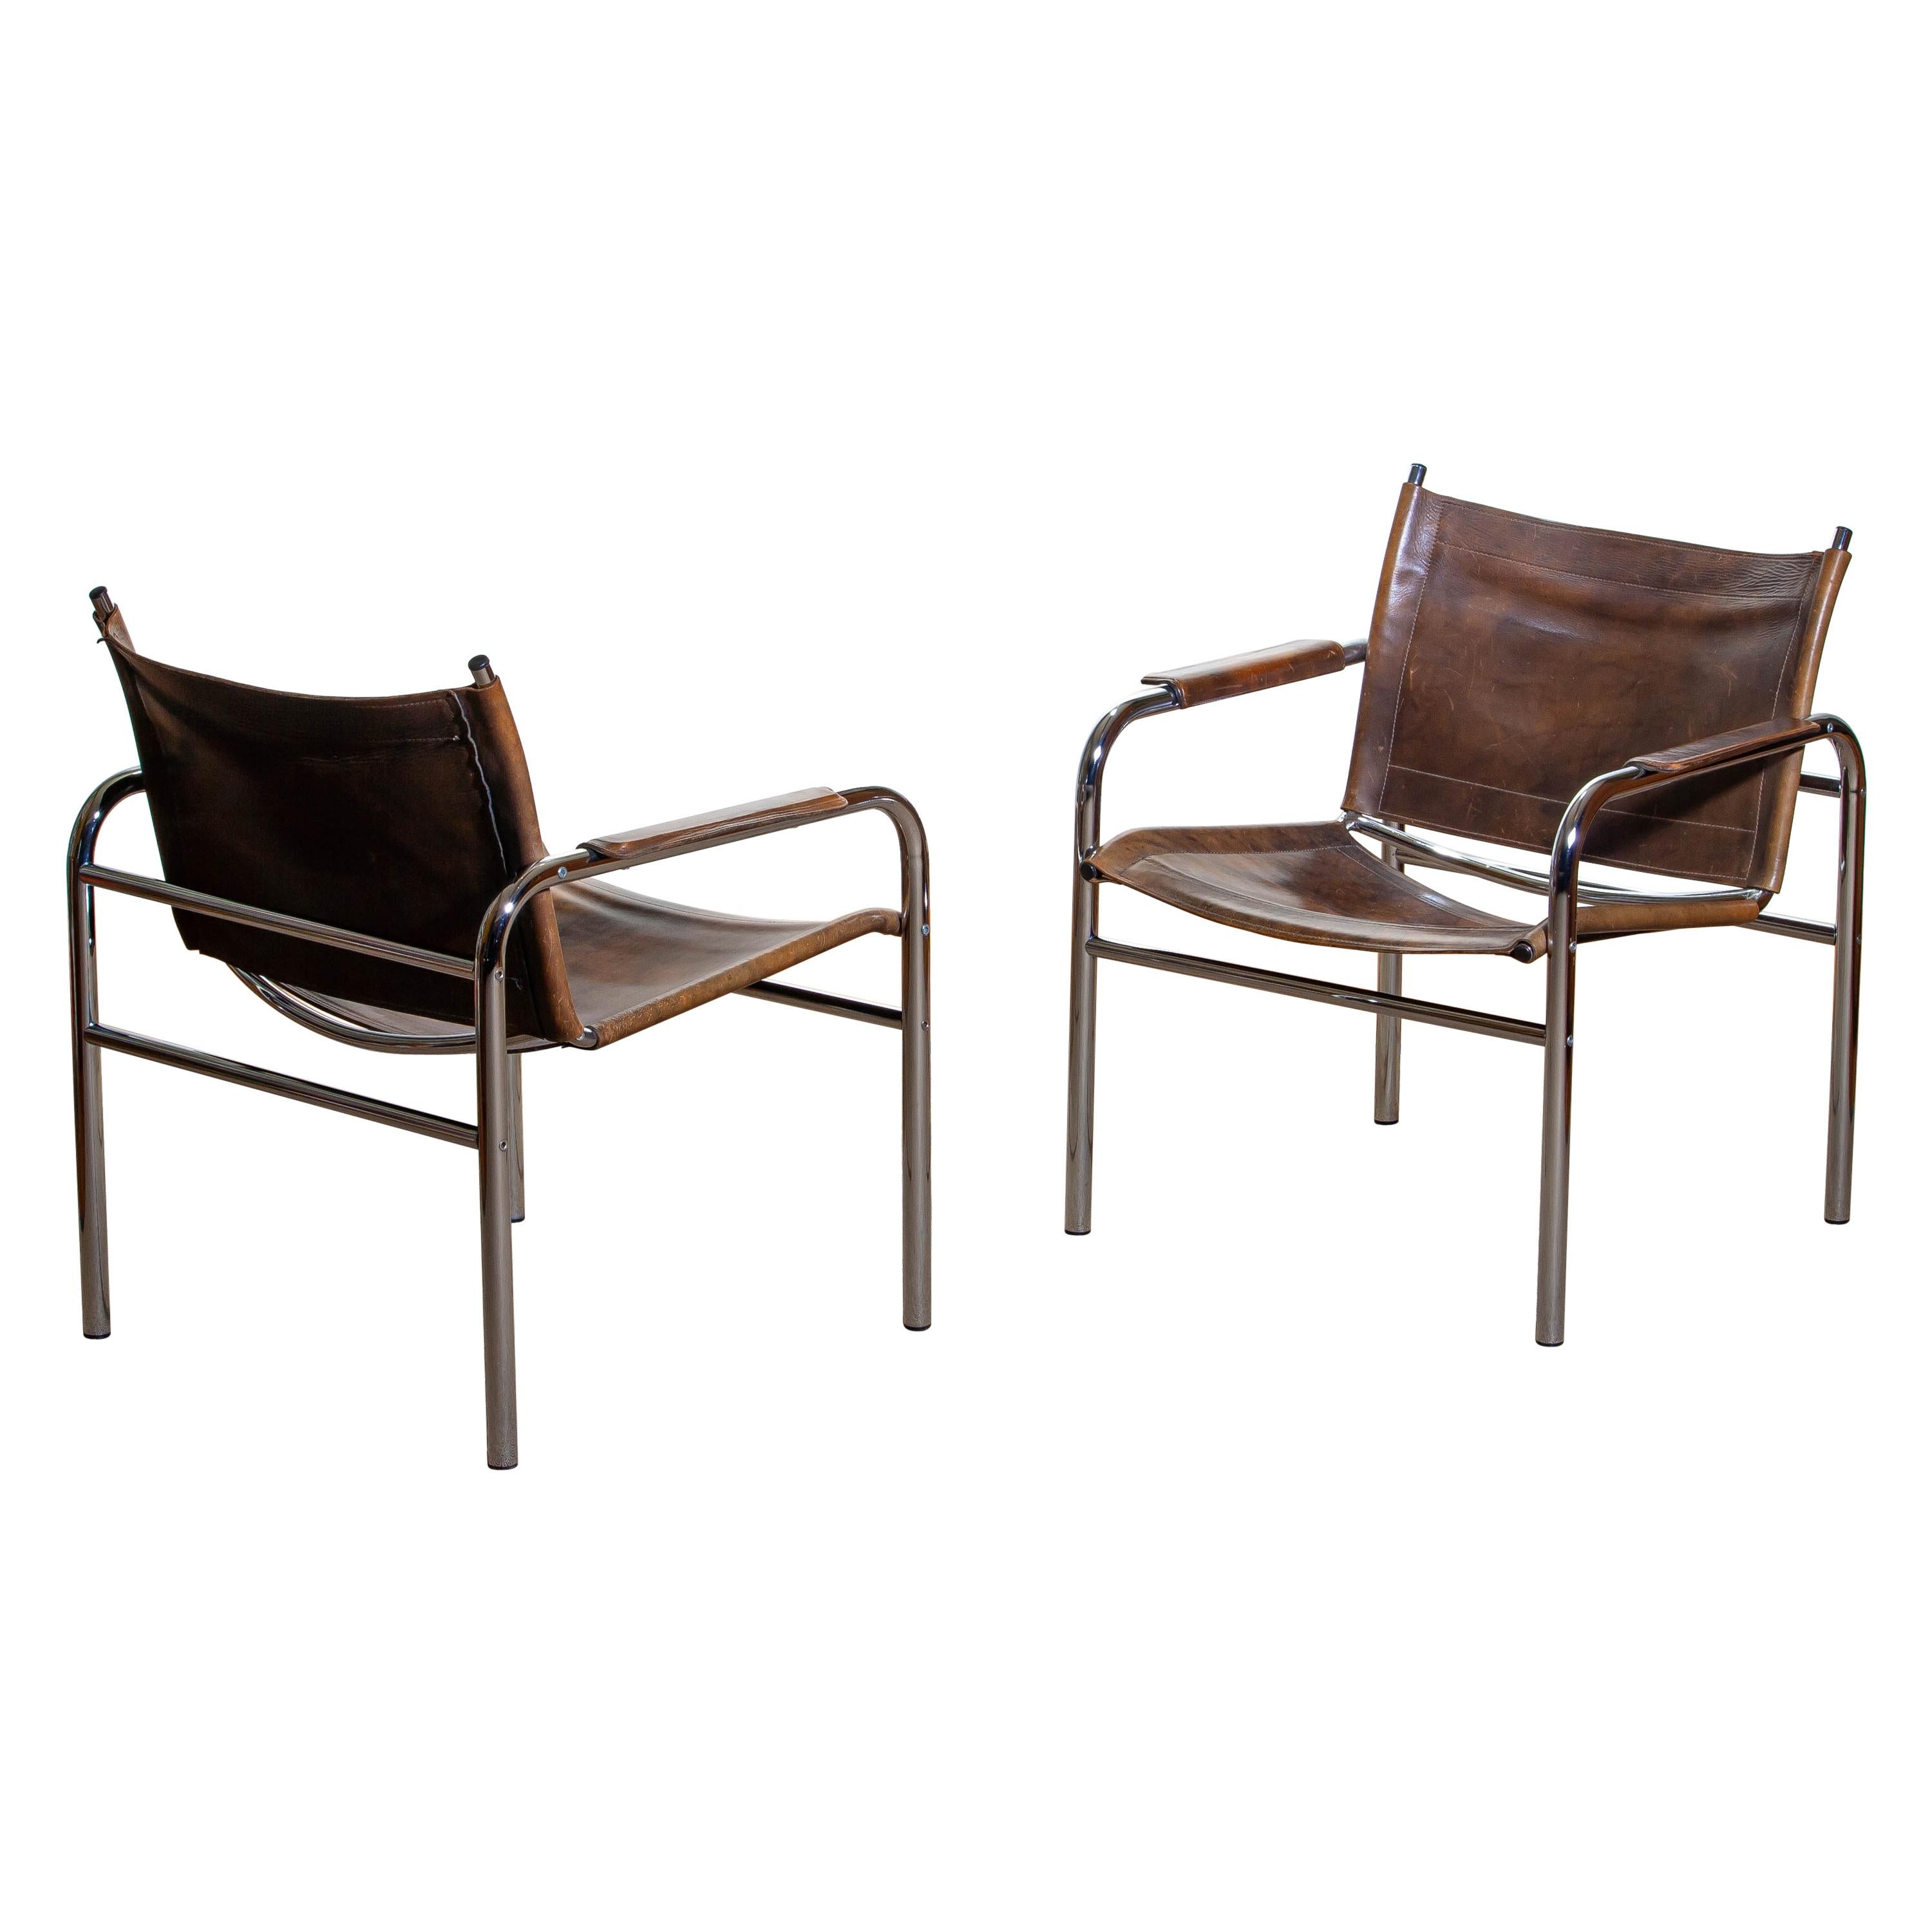 1980s, Pair of Leather and Tubular Steel Armchairs by Tord Bjorklund, Sweden 8